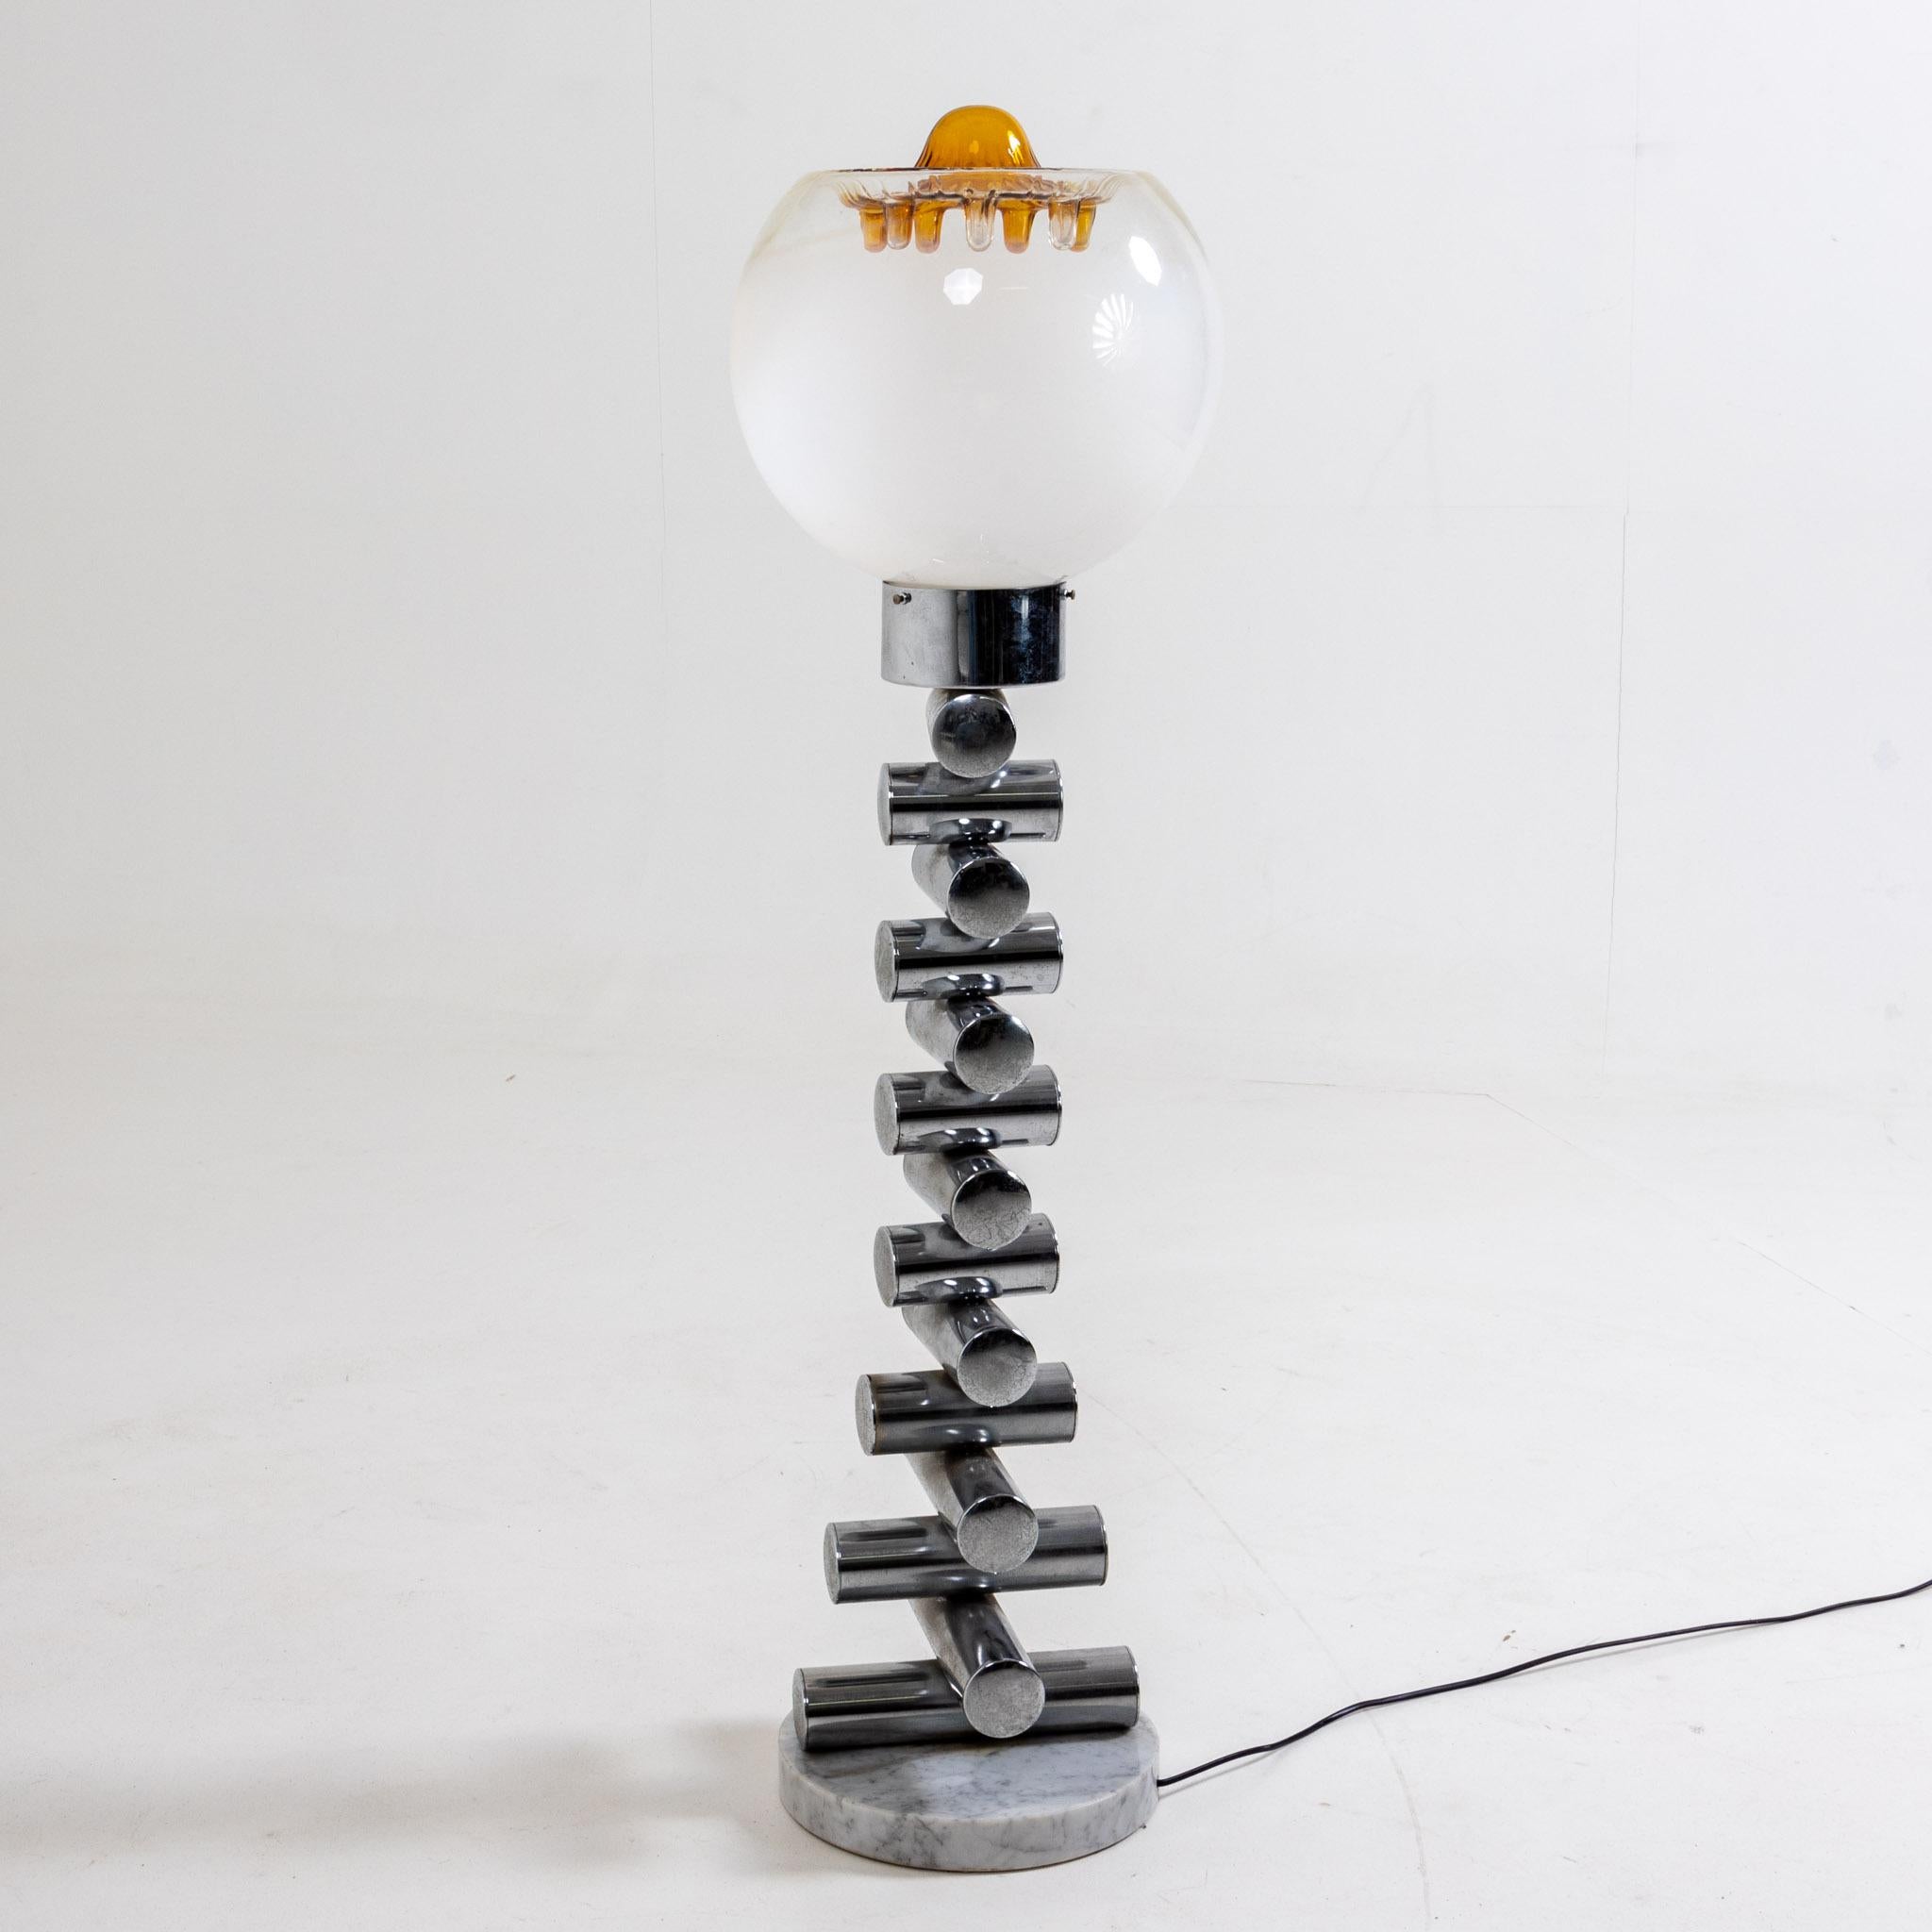 Floor lamp standing on round marble disc with chrome stem made of cylindrical elements and spherical glass shade with amber drop decoration.